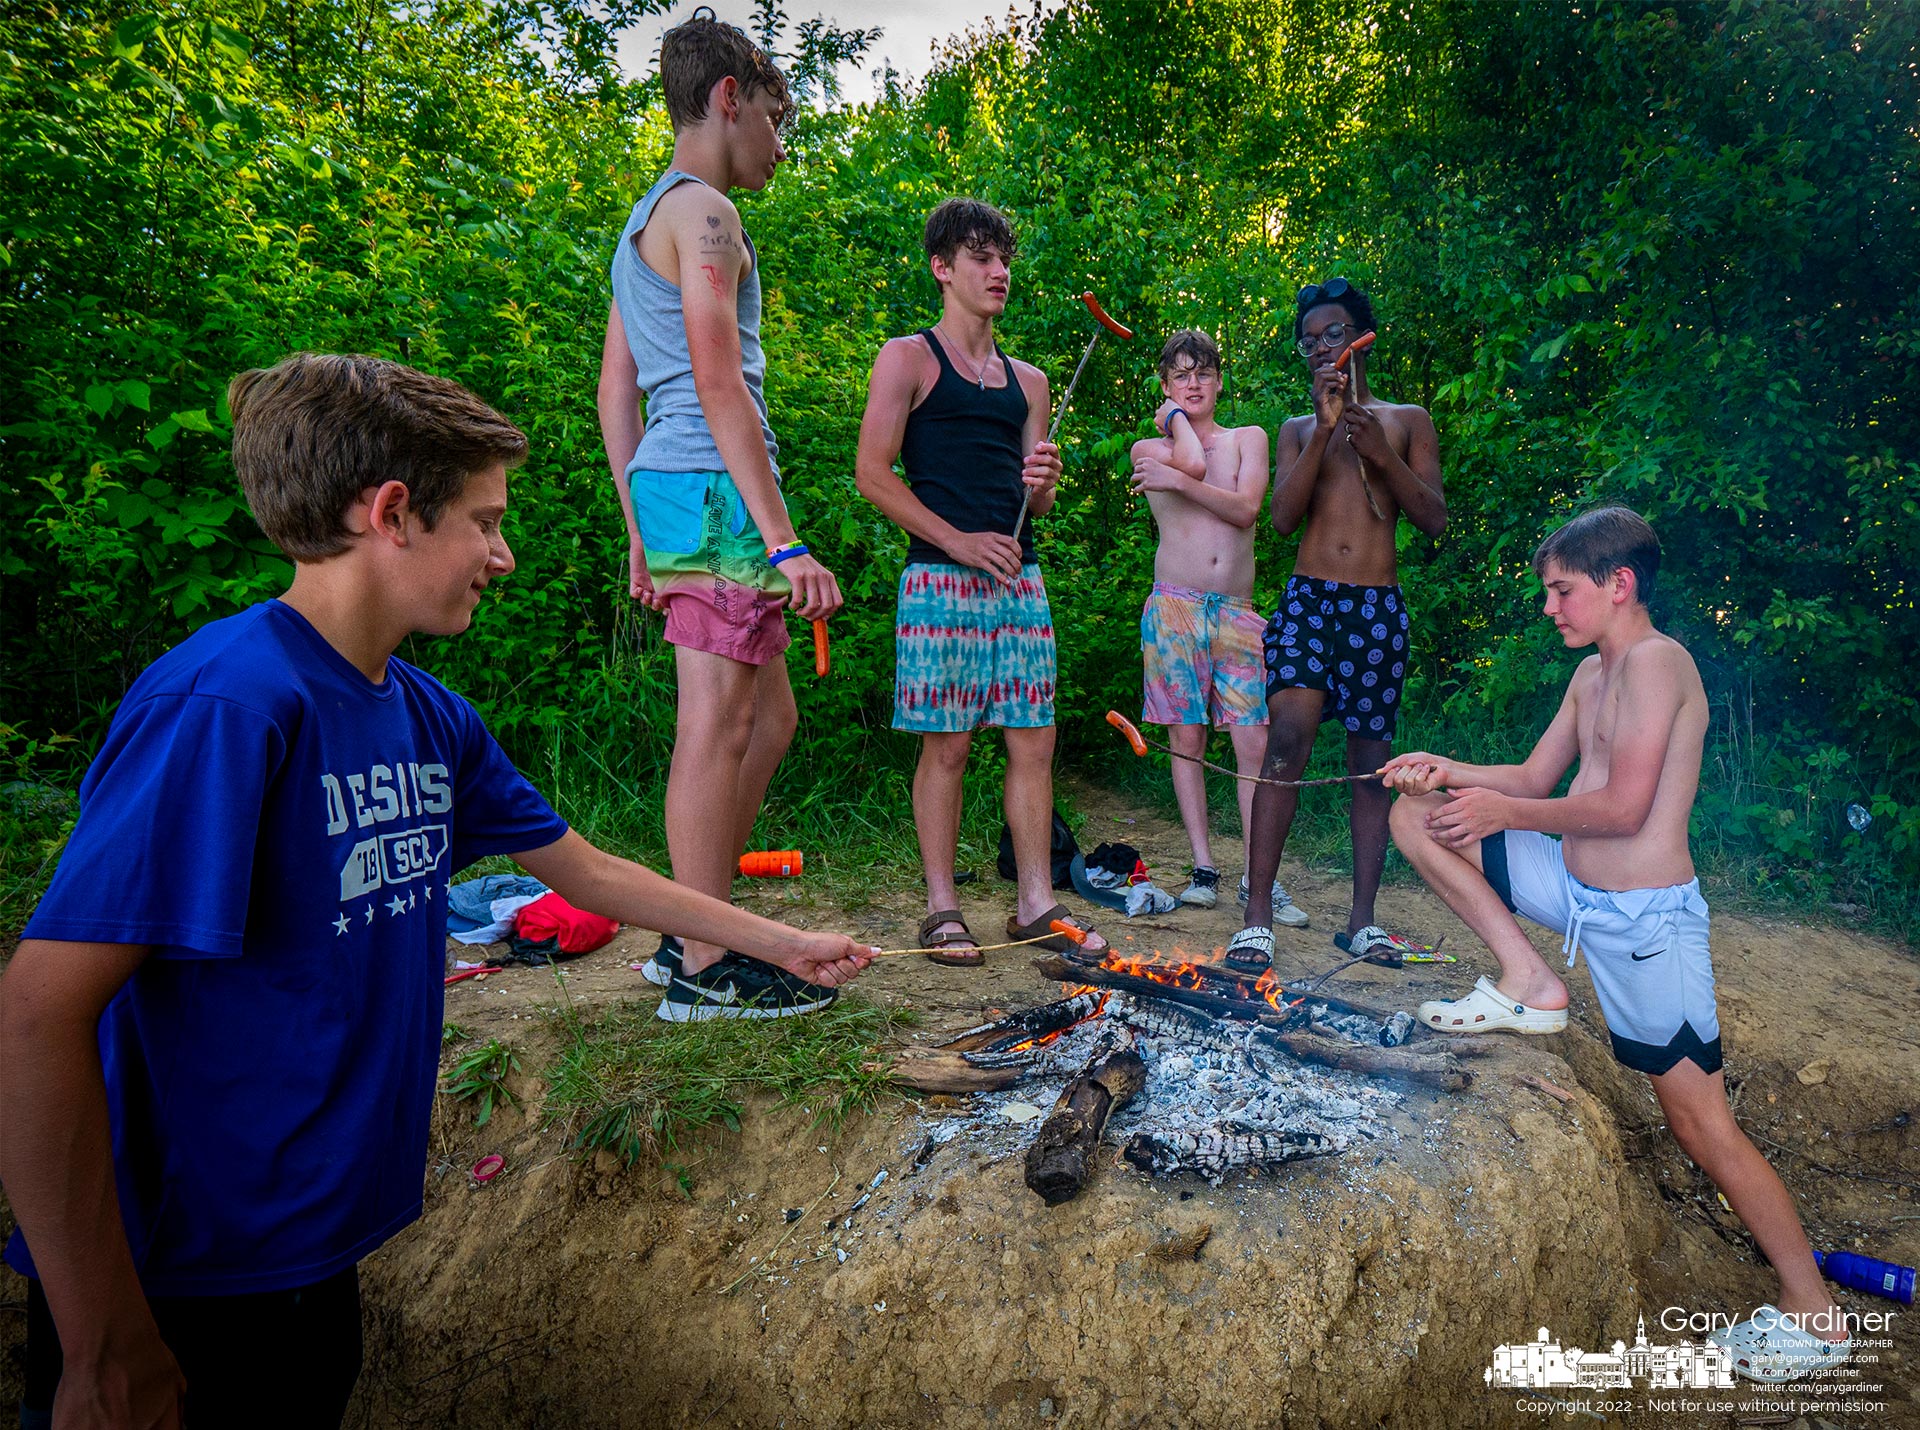 A group of boys roast hotdogs on the fire they started on the shoreline of Hoover Reservoir taking advantage of a warm Spring day after school. My Final Photo for May 25, 2022.